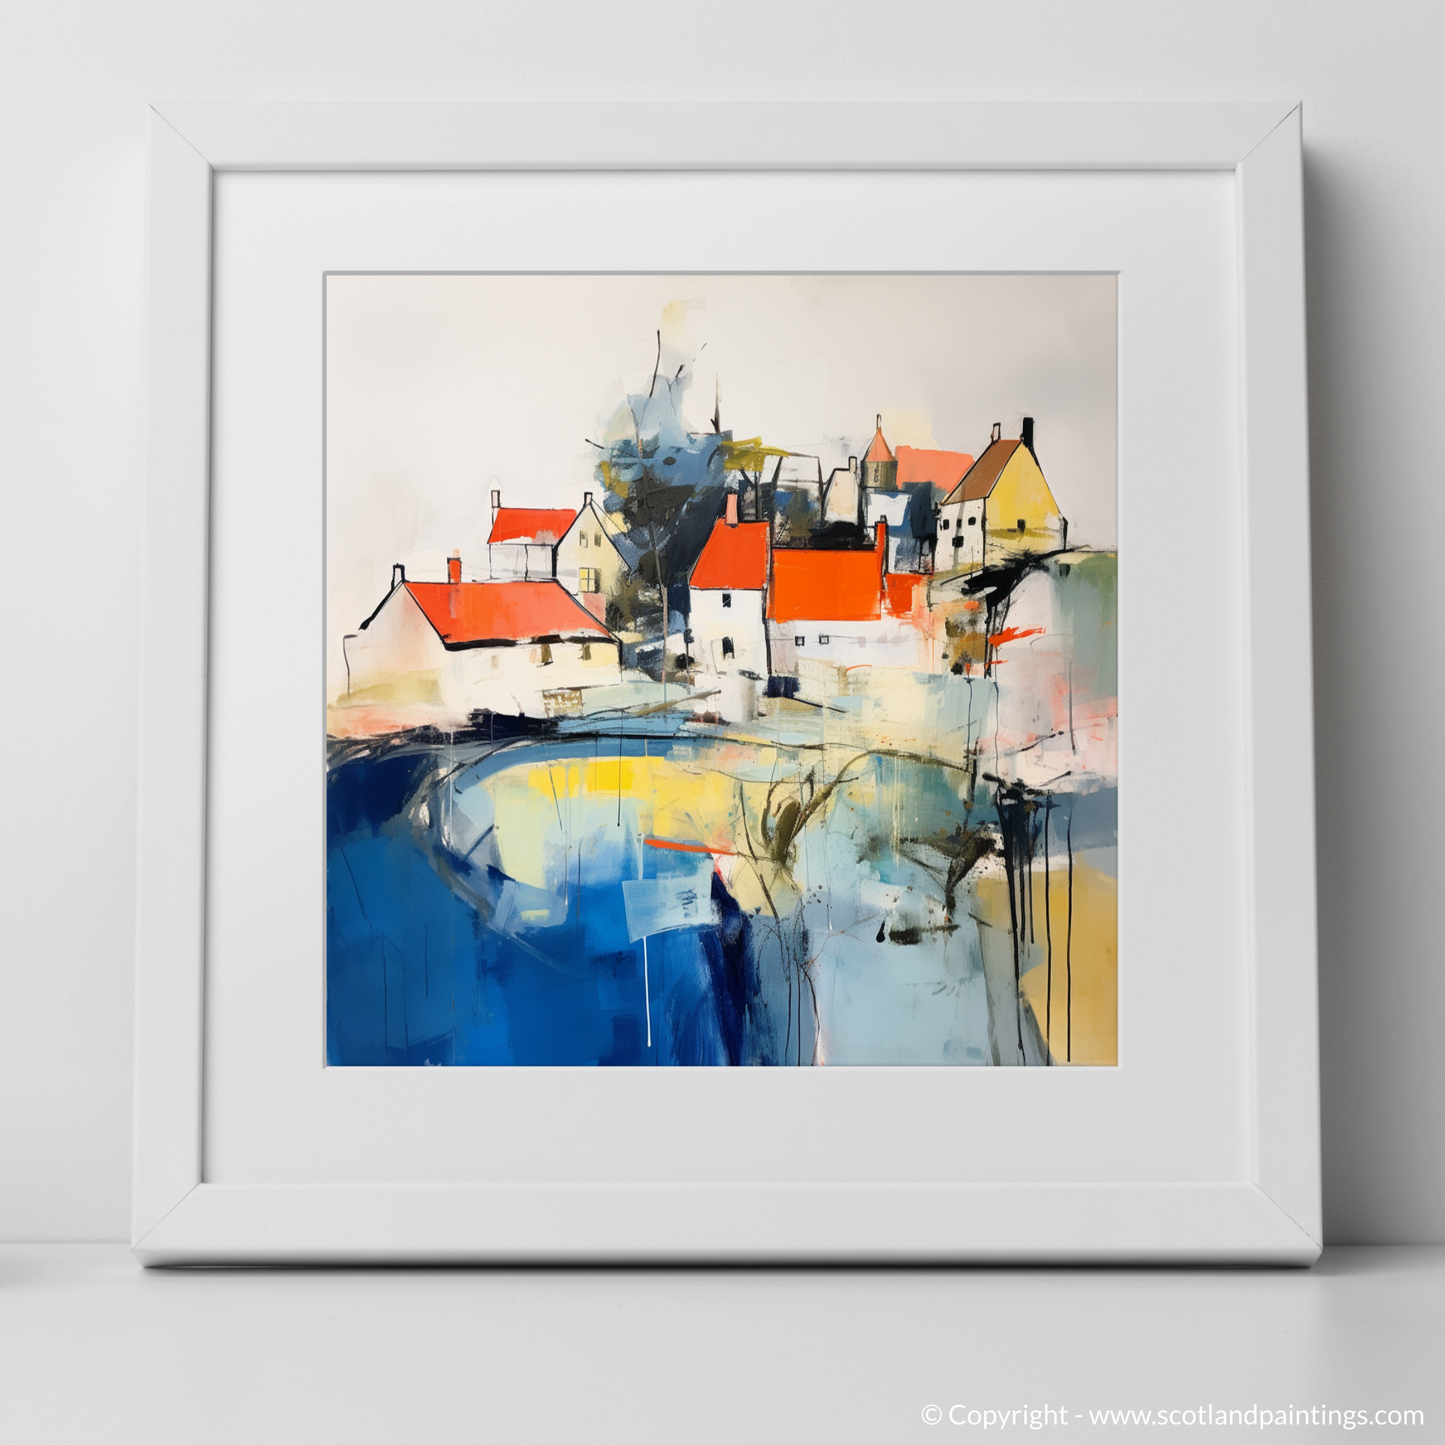 Culross Dreamscapes: An Abstract Voyage Through Scottish Charm